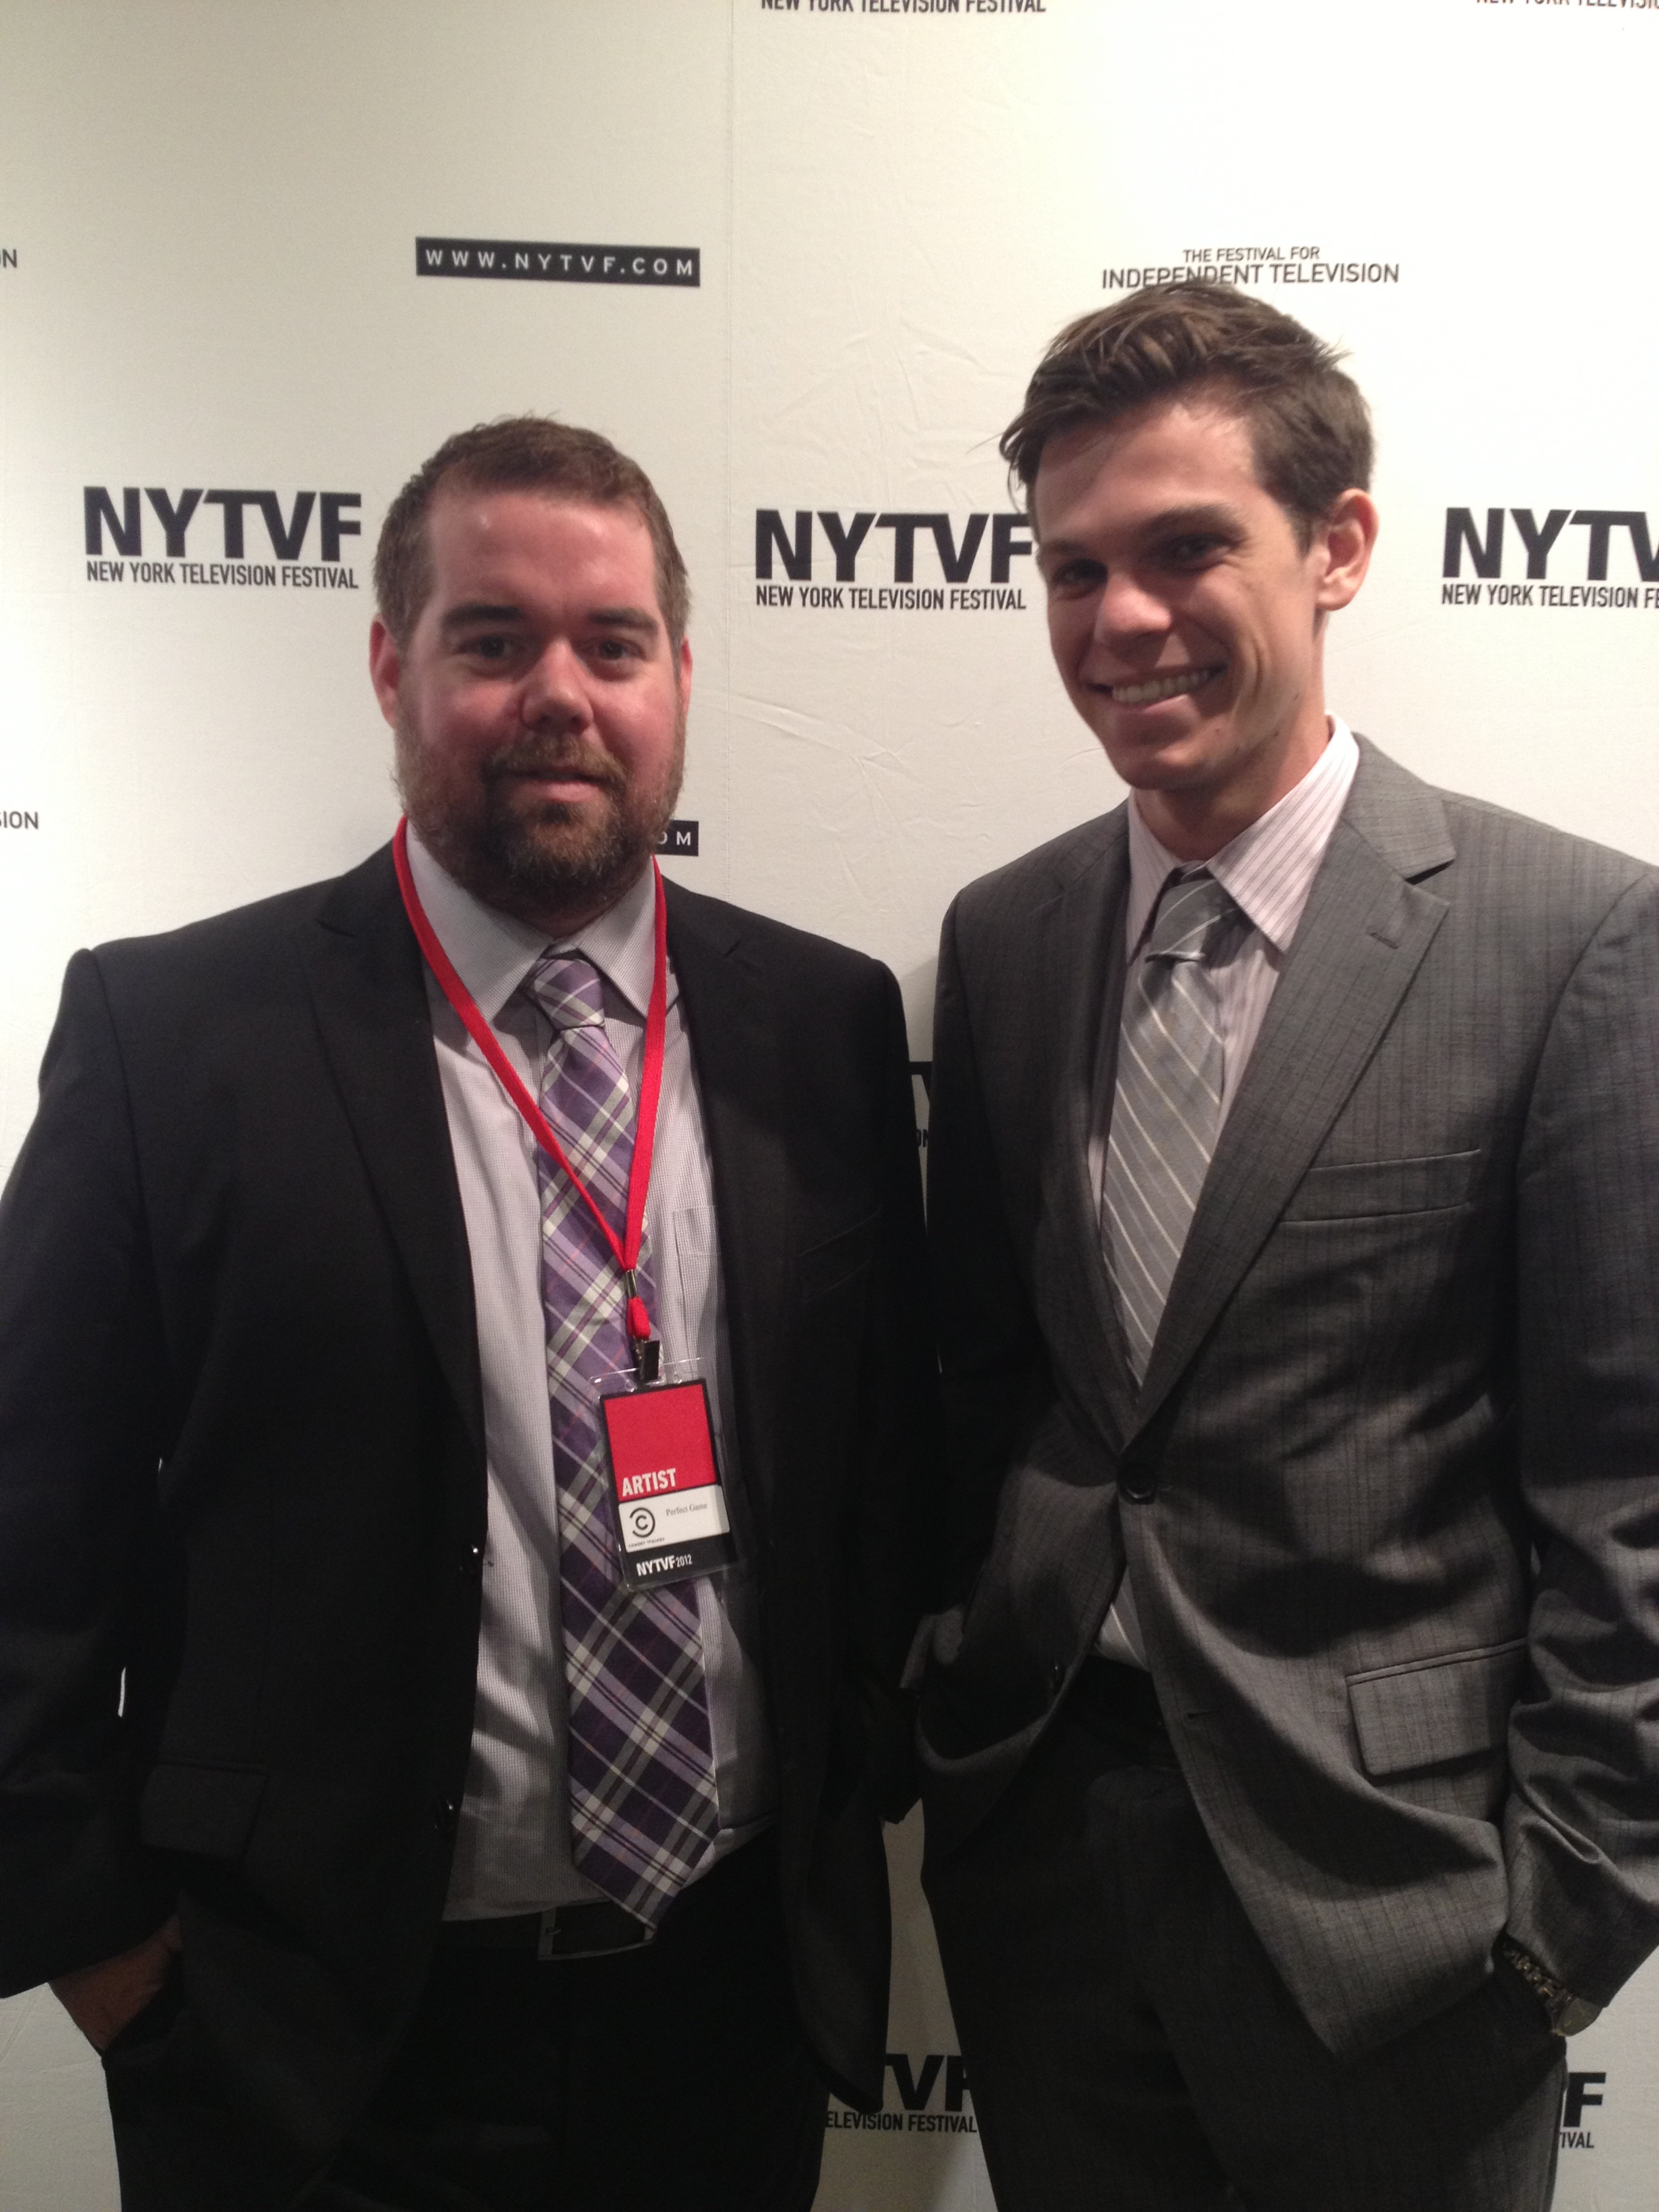 Nick Armstrong and his writing partner Trevor Tevel receive a development deal from A&E at the NYTVF